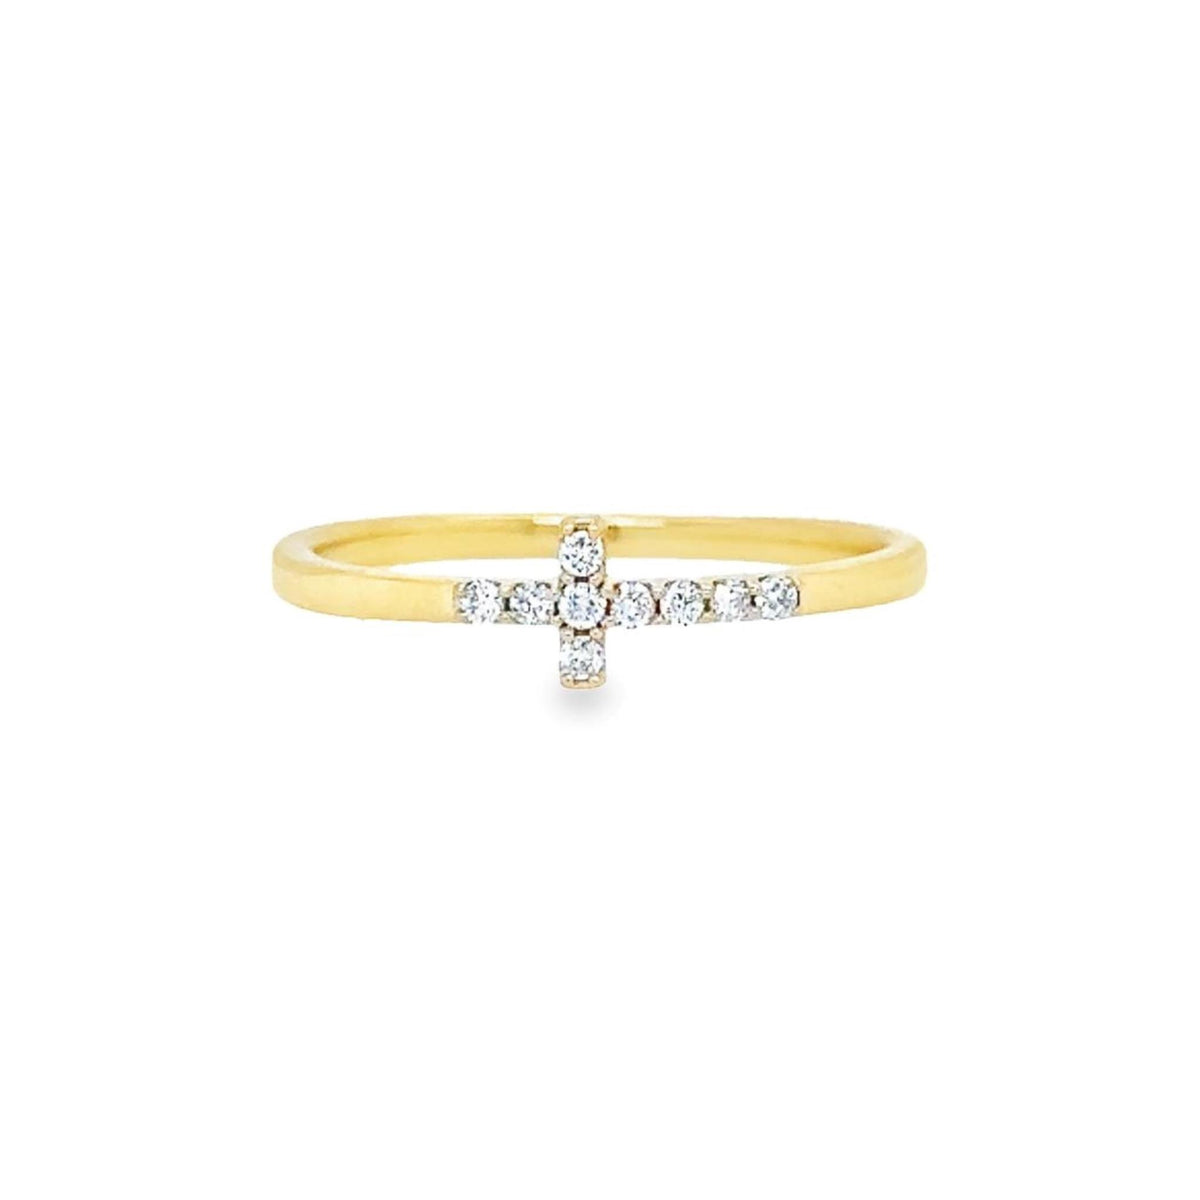 10Kt Yellow Gold Cross Ring With 0.20cttw Natural Diamonds